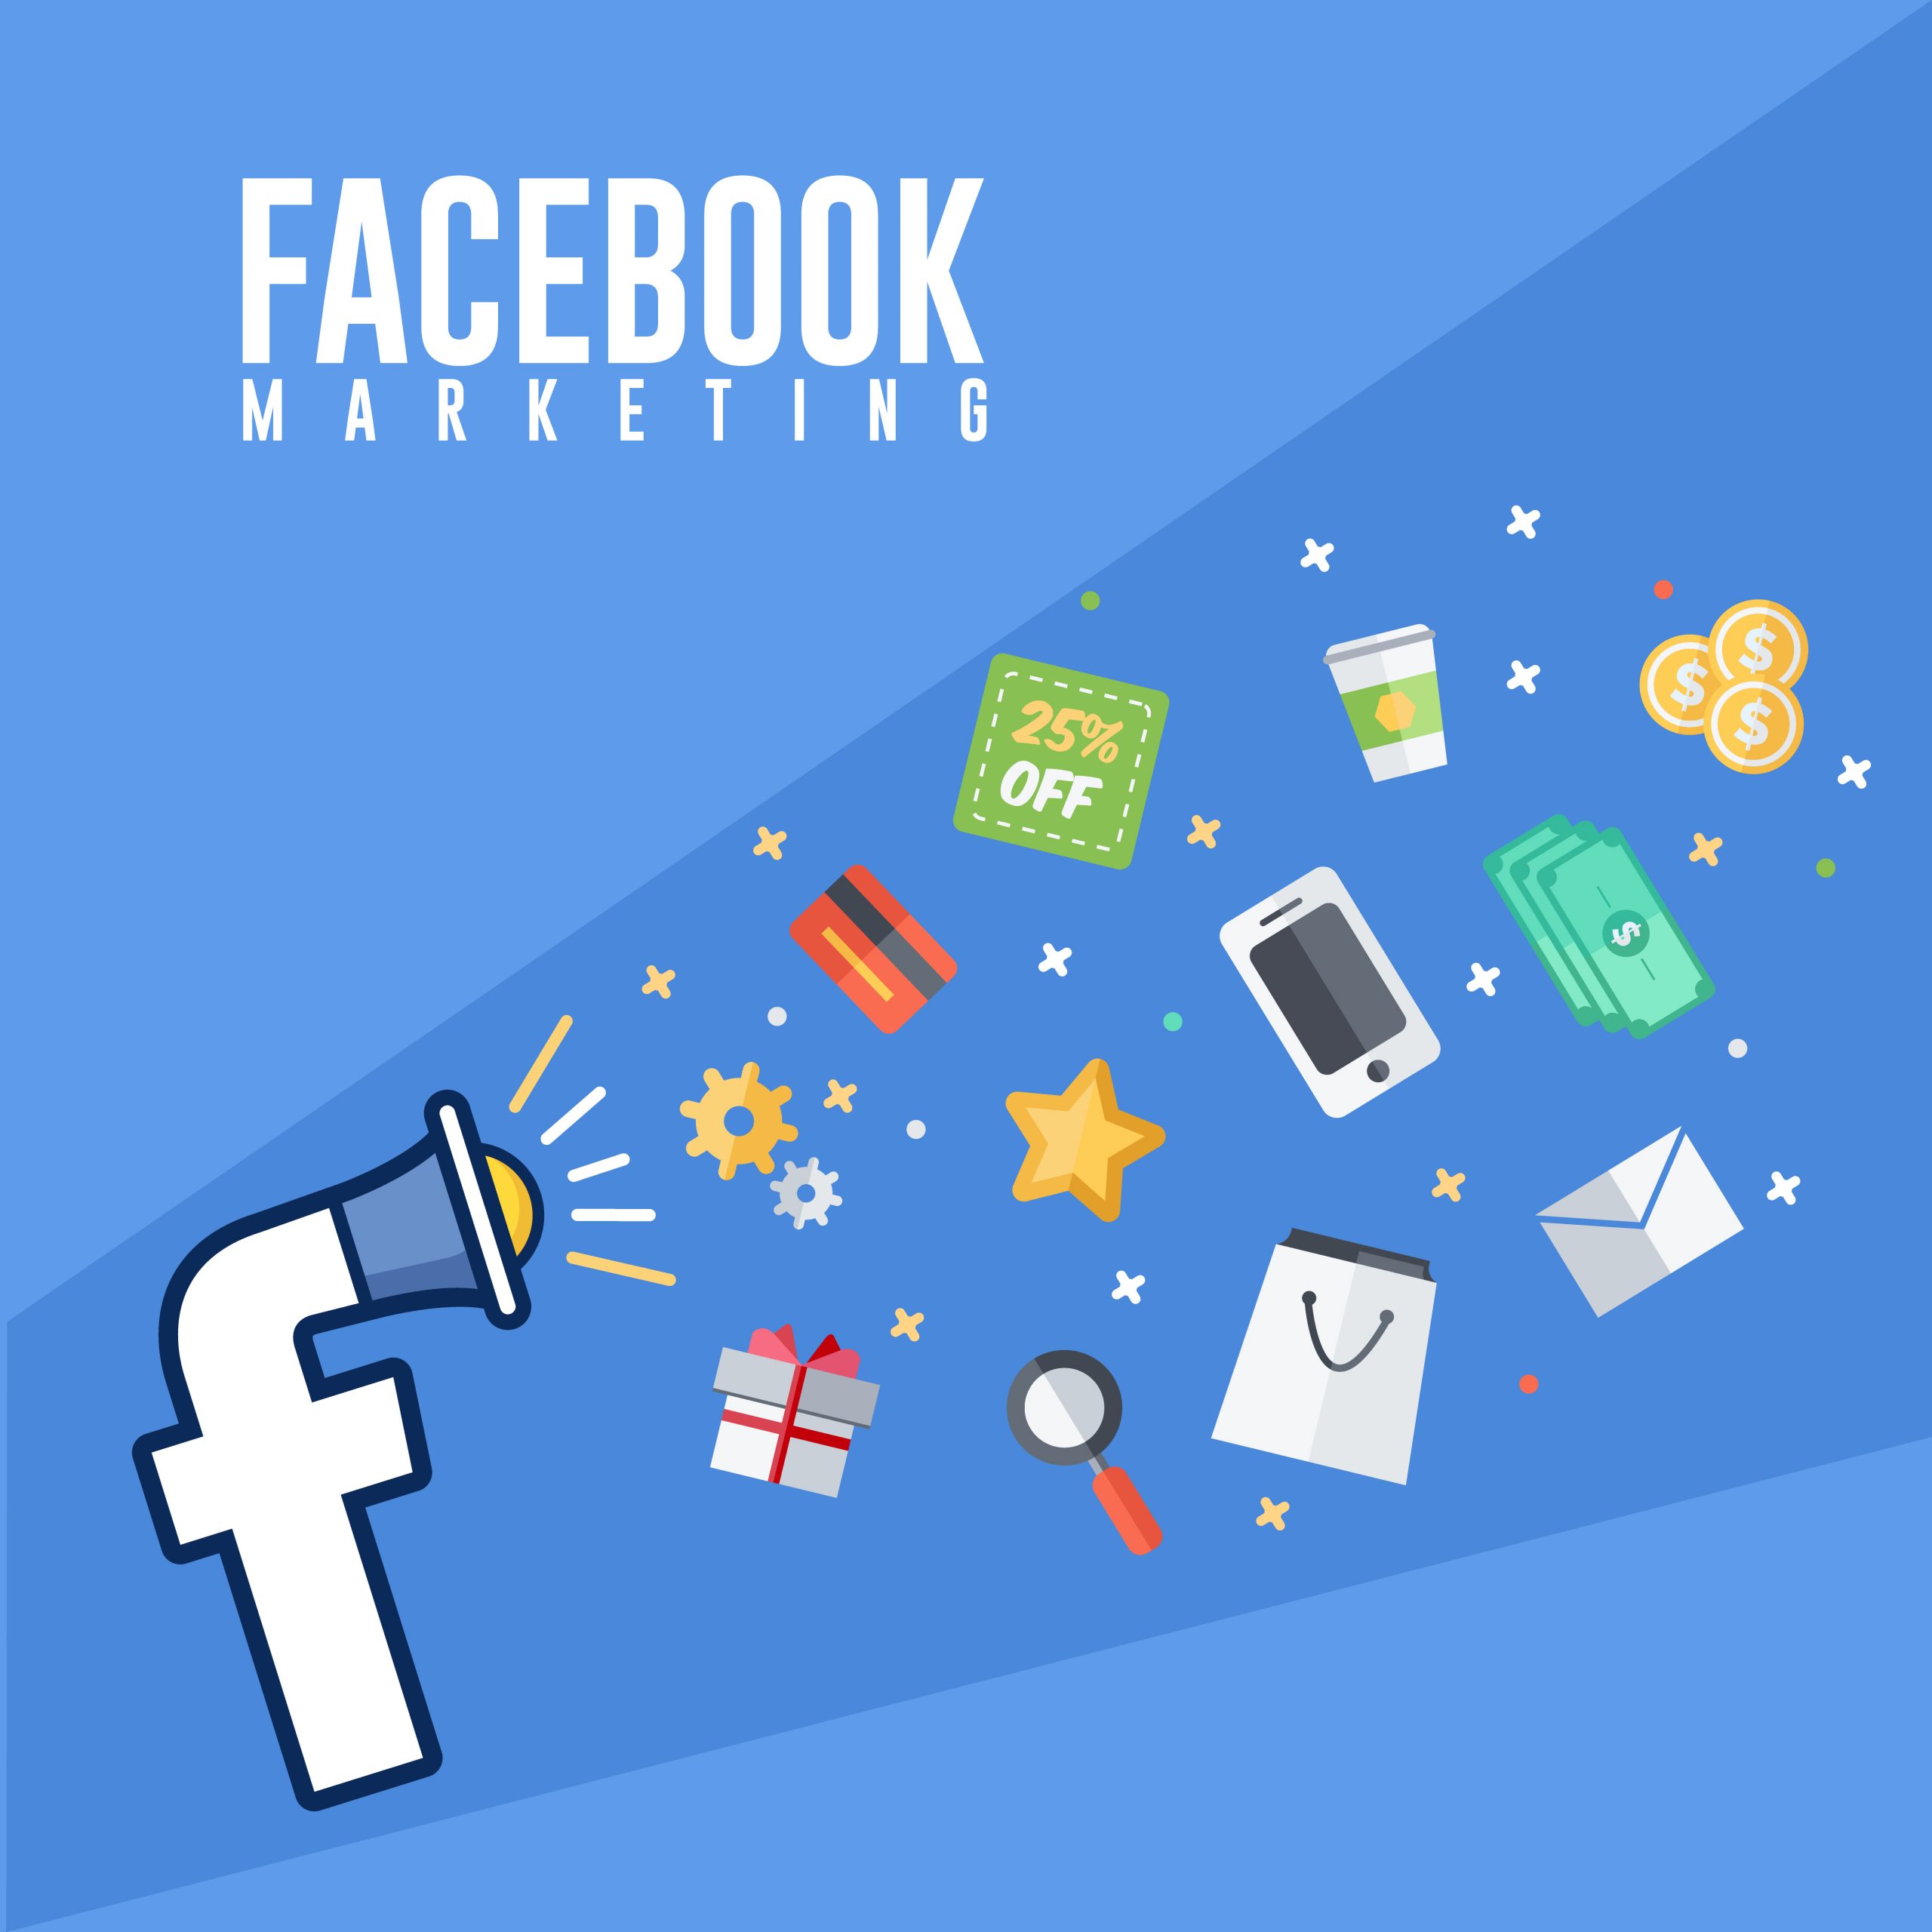 Steps to an effective Facebook marketing strategy